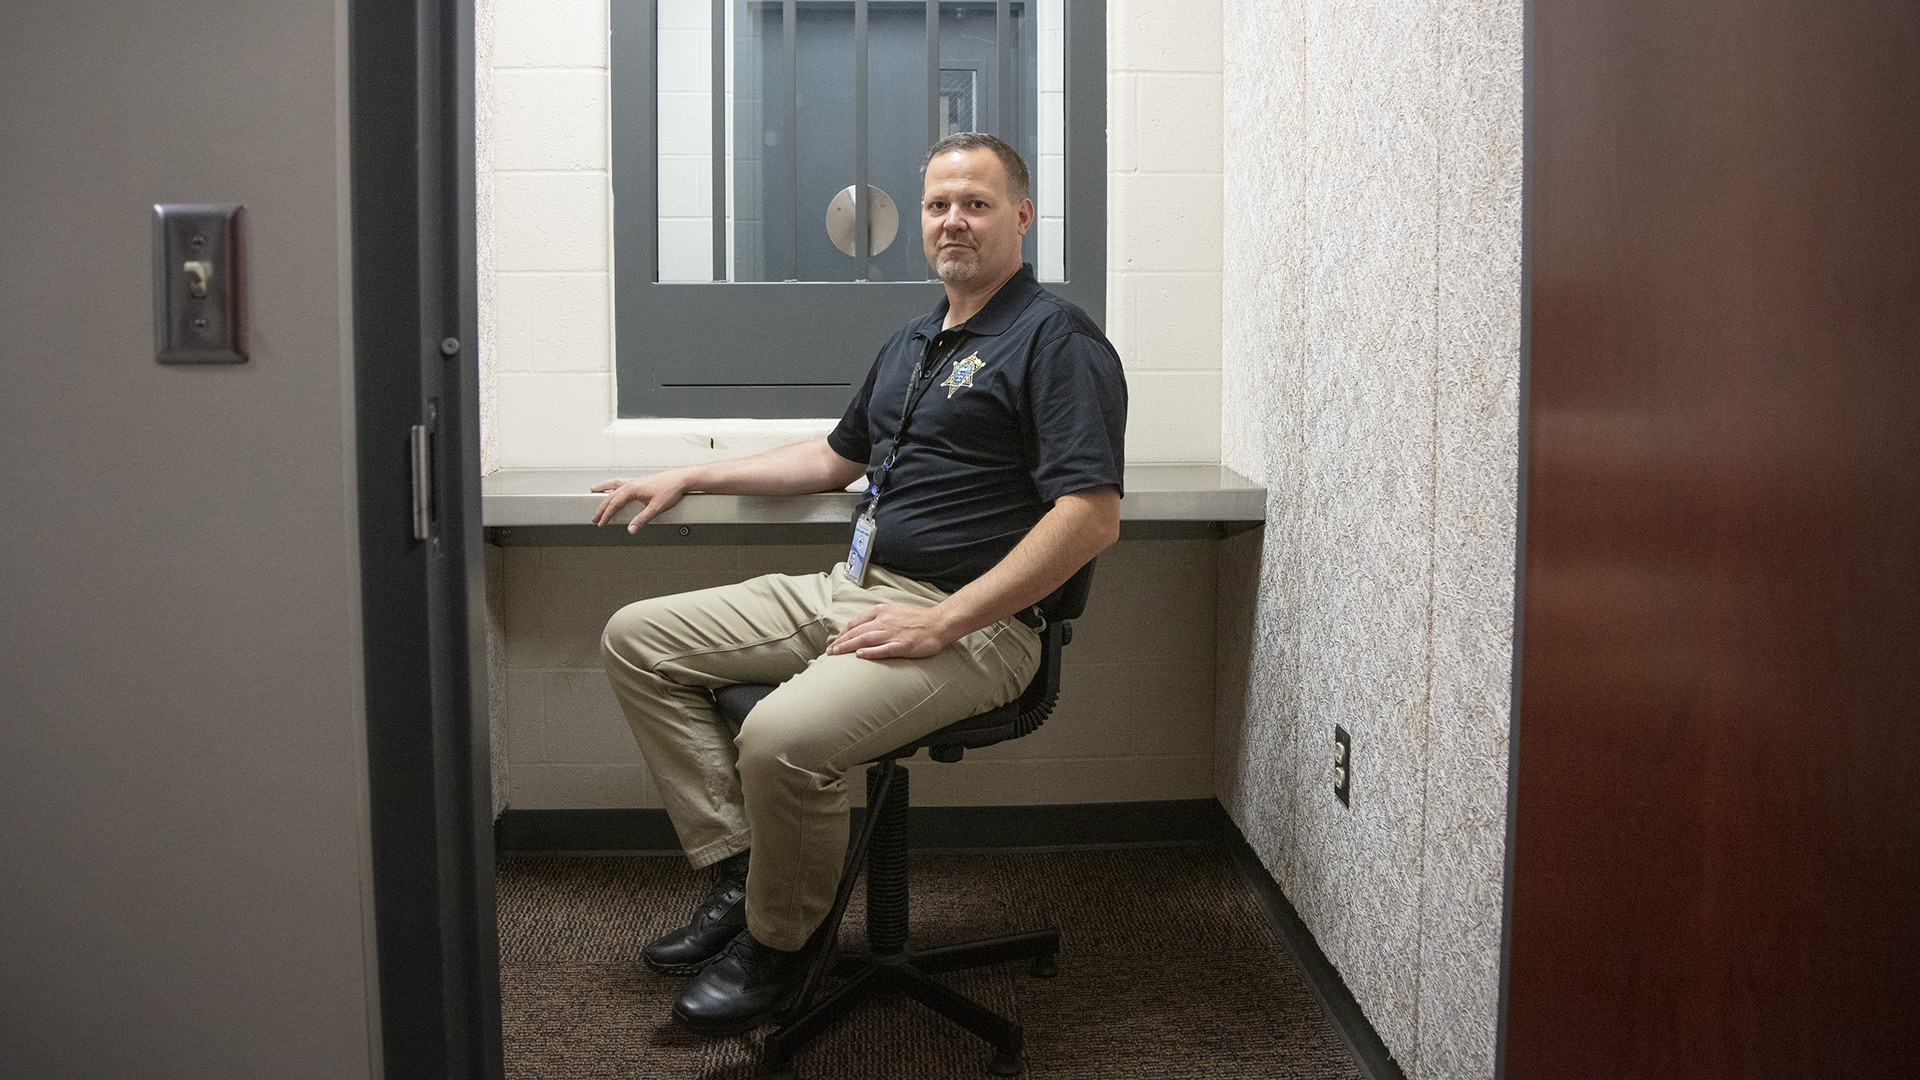 Dave Riewestahl sits in a chair inside a jail visitation room, with a connected room and door visible through a barred window.